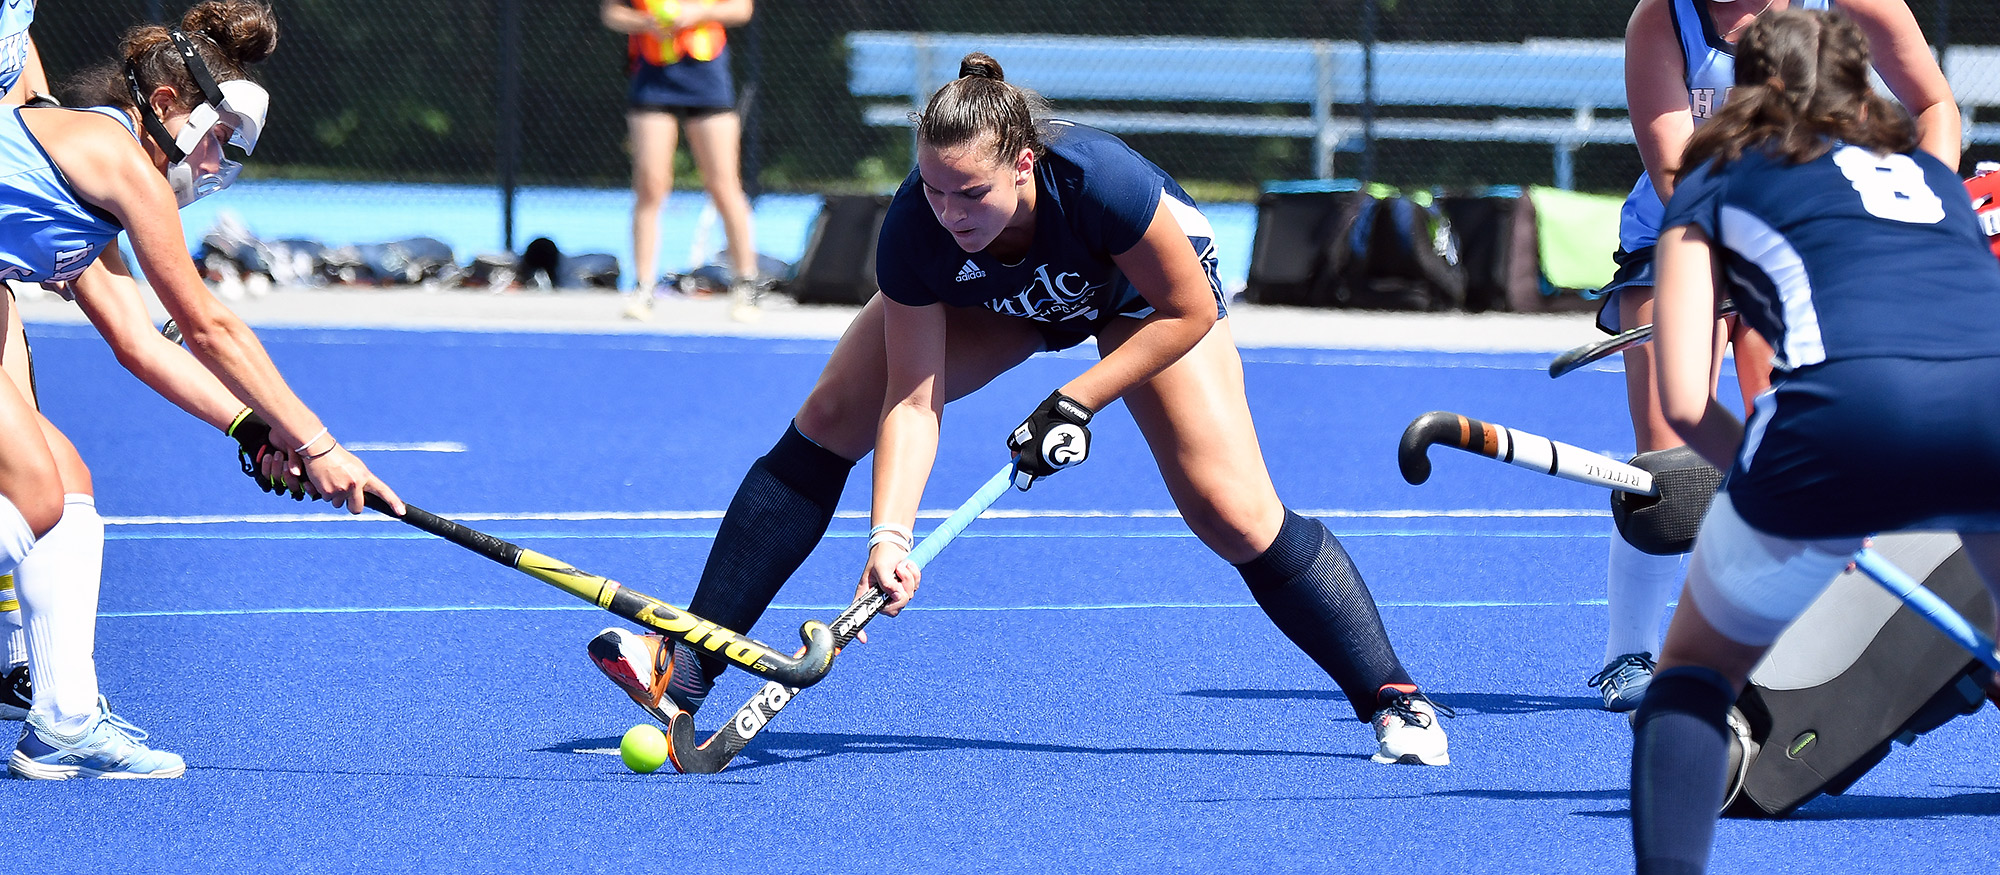 Sophia Guziewicz scored her second goal of the season for Mount Holyoke in a 6-1 loss at No. 7 Babson on Sept. 17, 2022. (RJB Sports file photo)